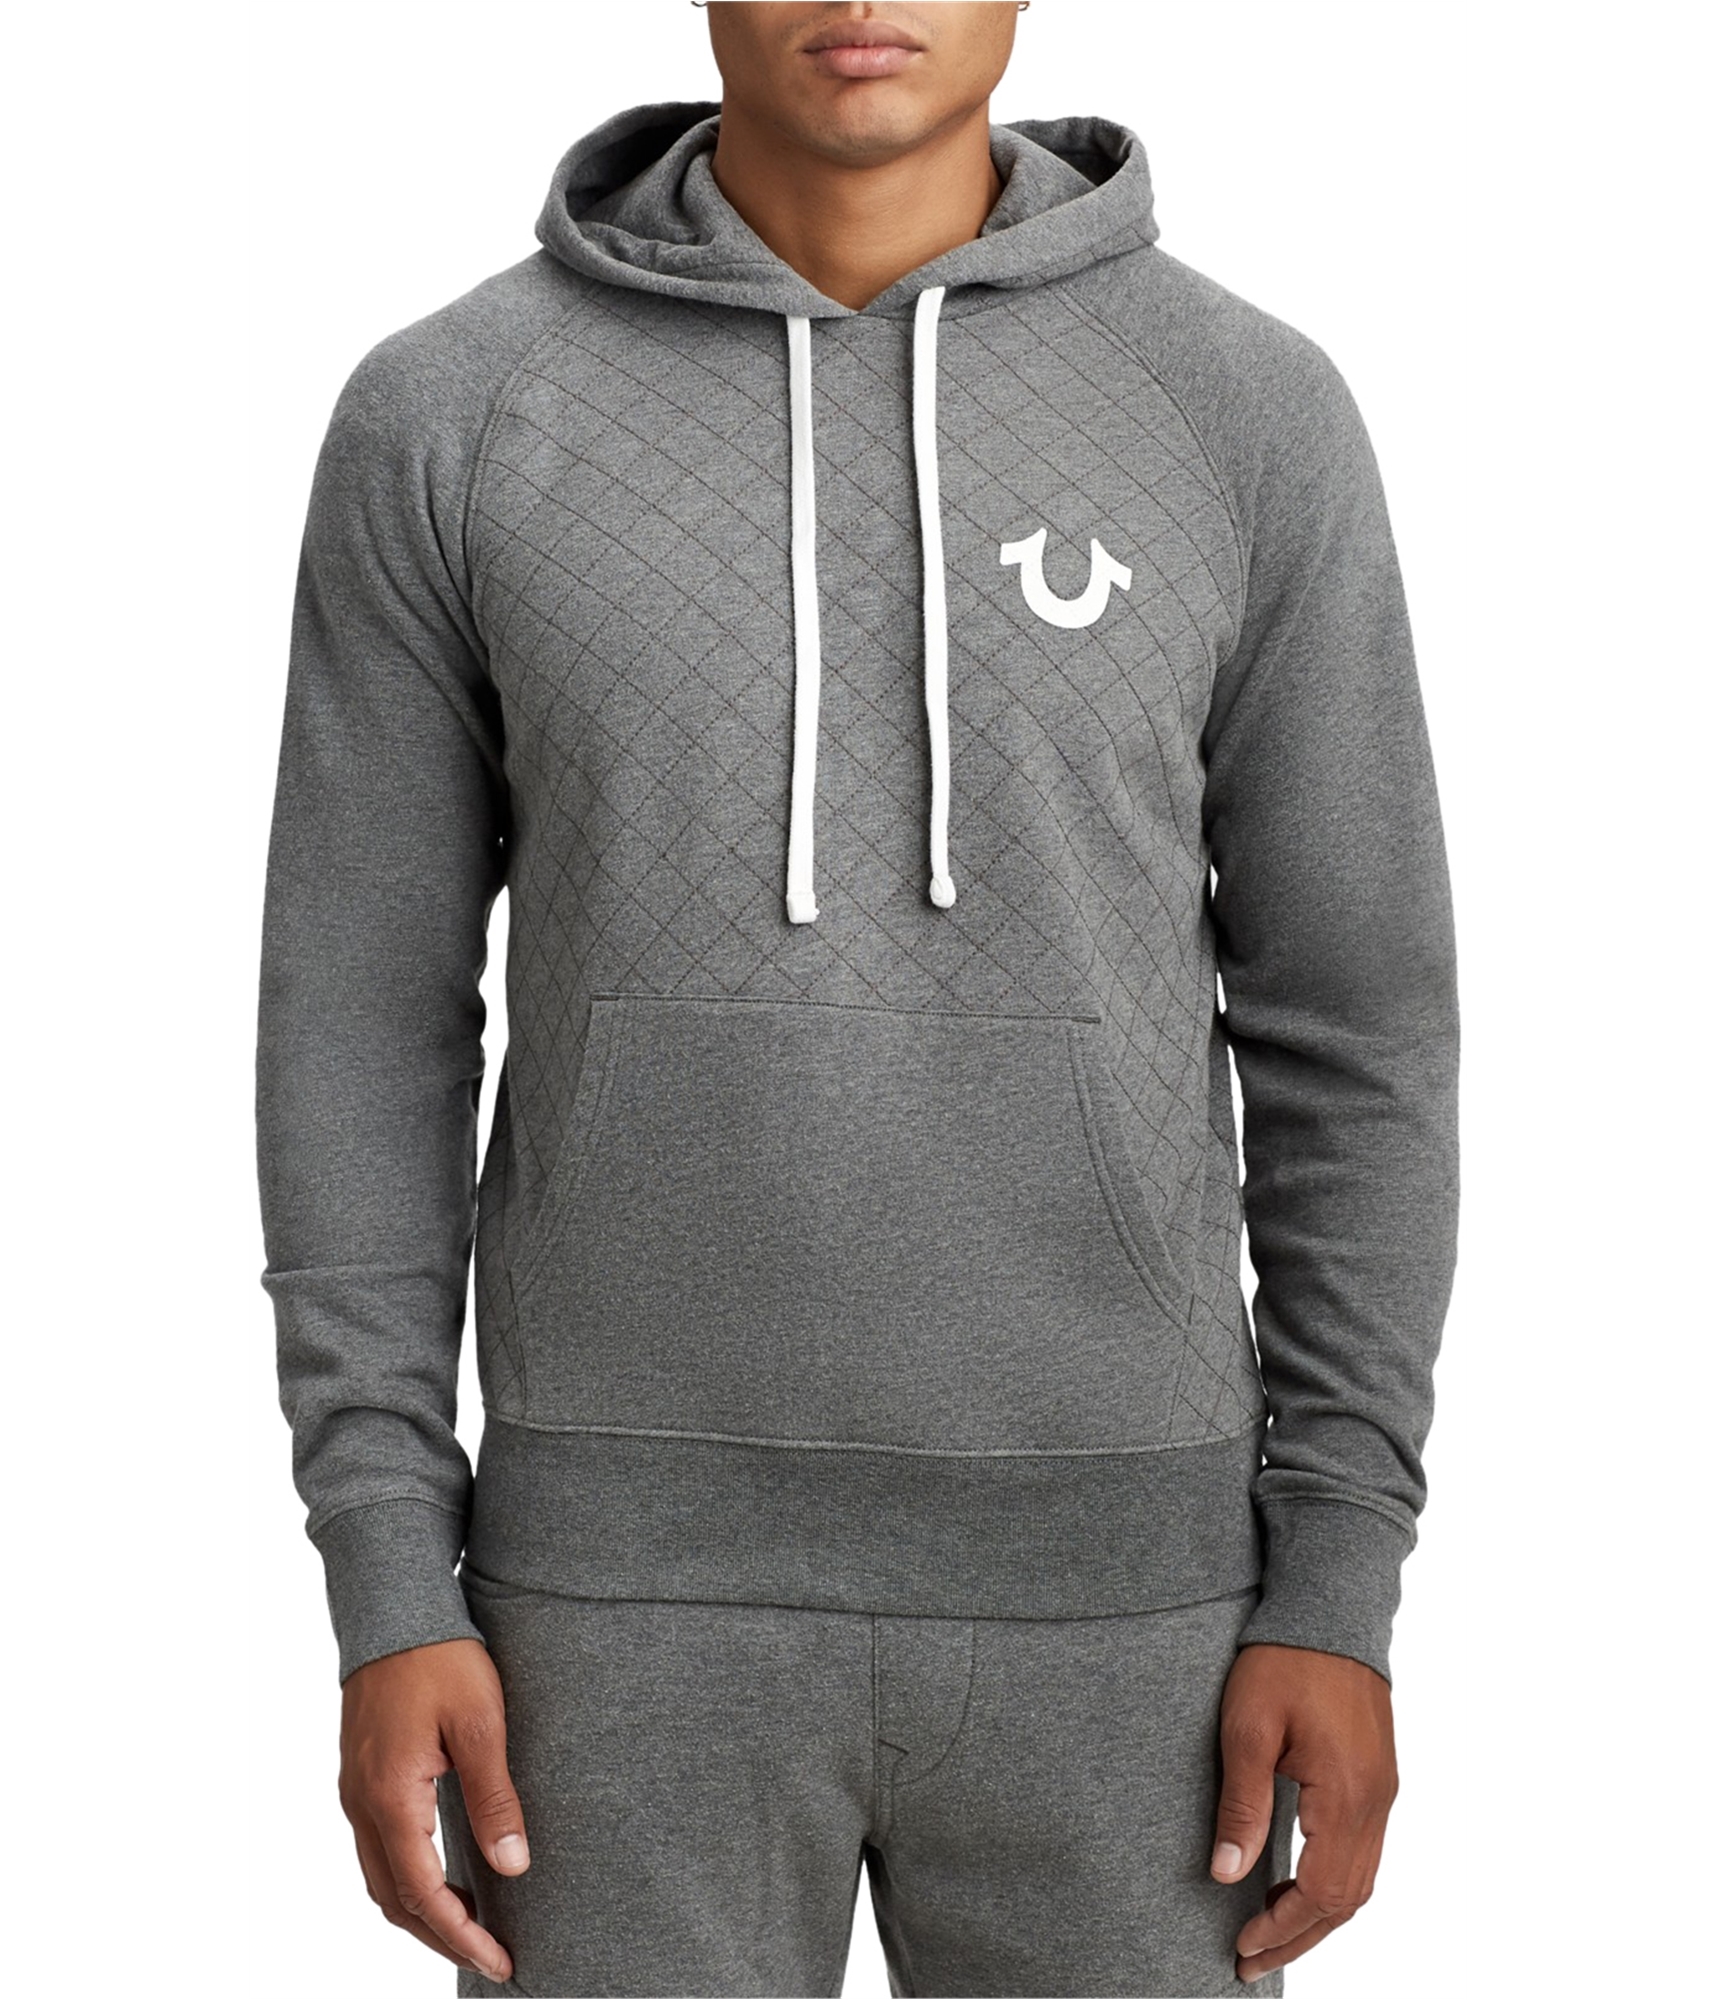 QUILTED HOODED SWEATSHIRT - Gray